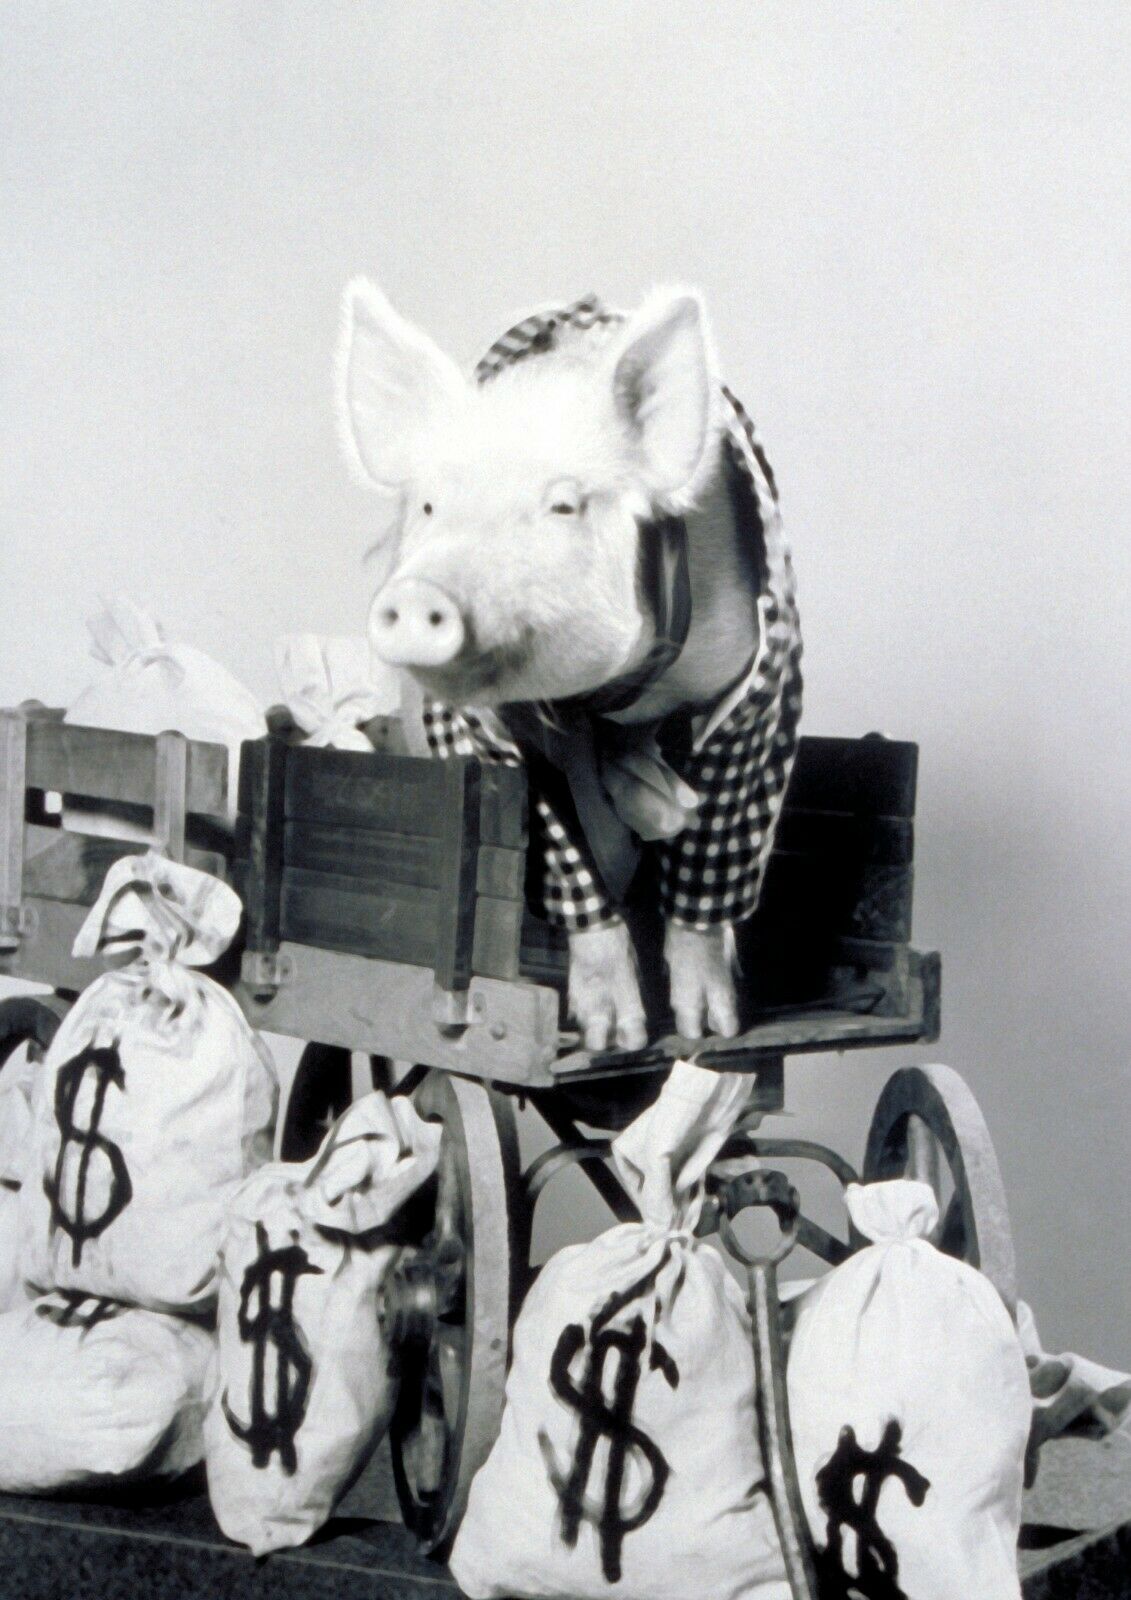 GREEN ACRES - TV SHOW PHOTO #1 - ARNOLD THE PIG